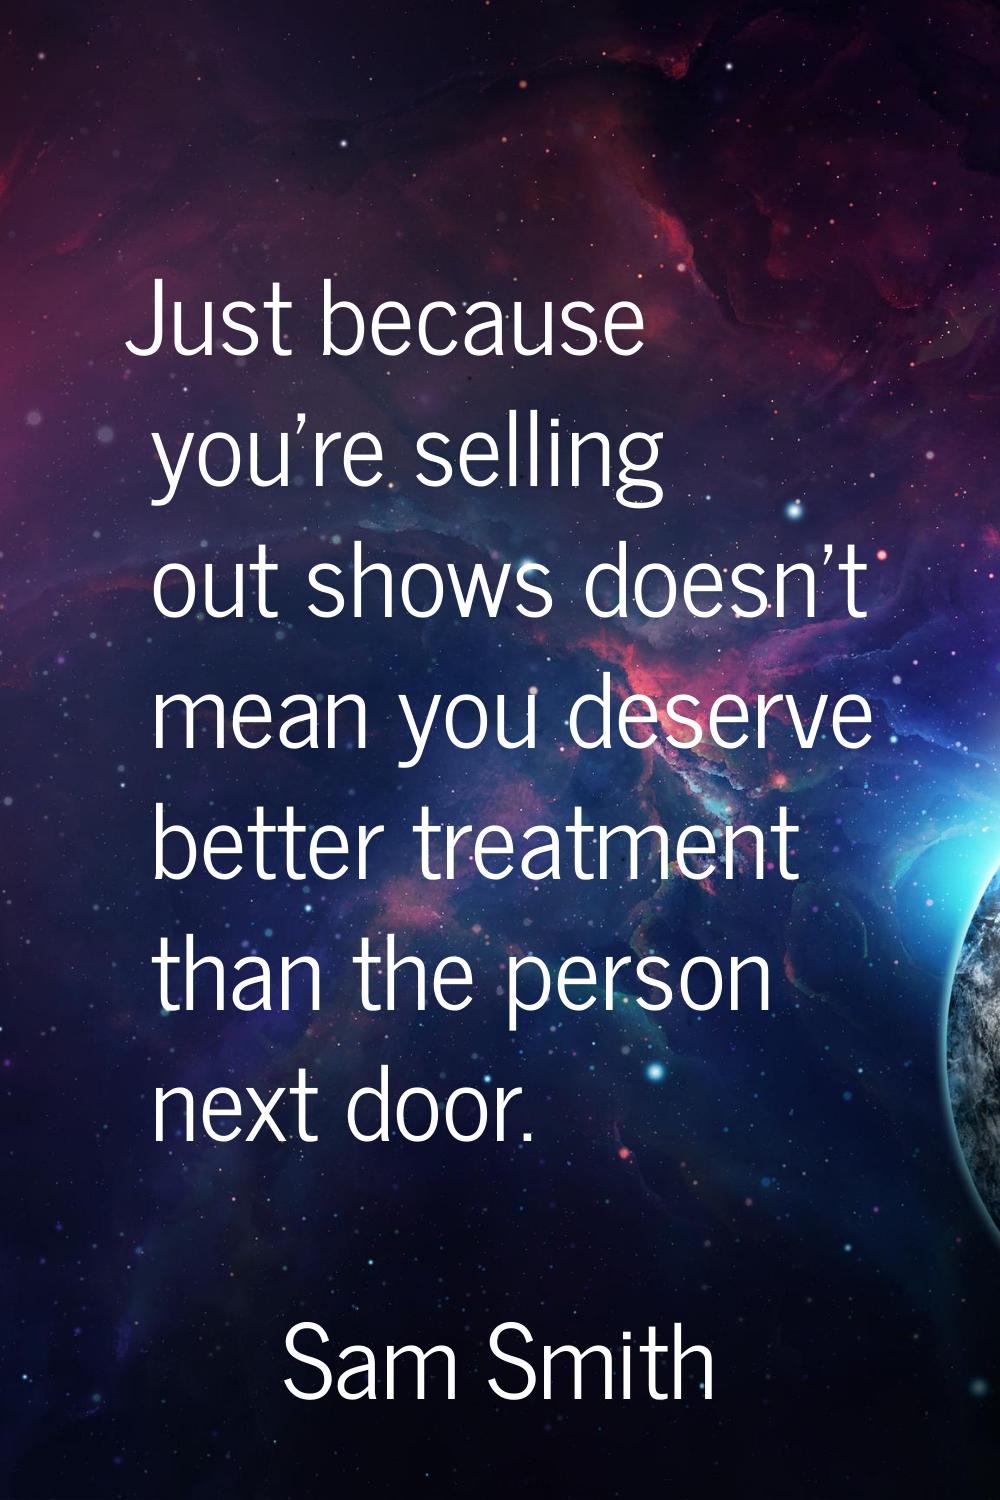 Just because you're selling out shows doesn't mean you deserve better treatment than the person nex